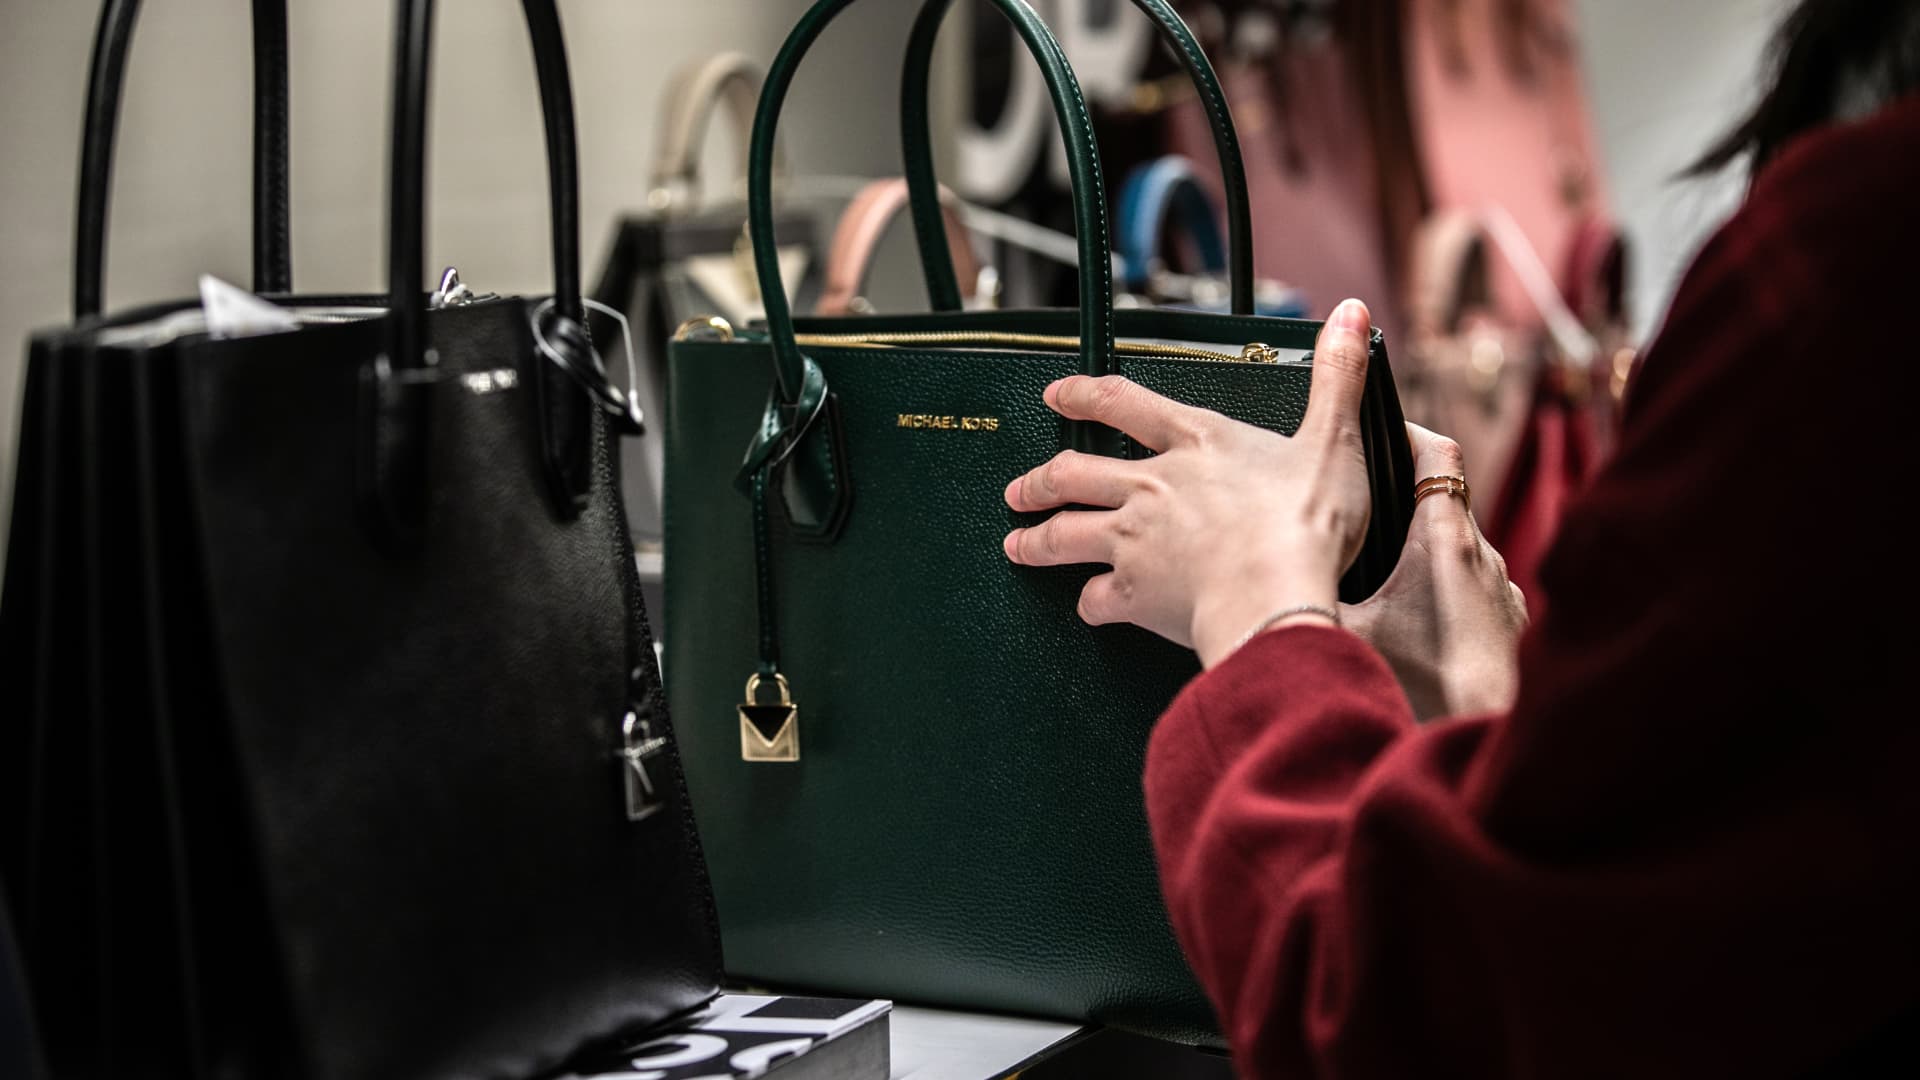 This Michael Kors bag will always be in style — and right now, it's 70% off